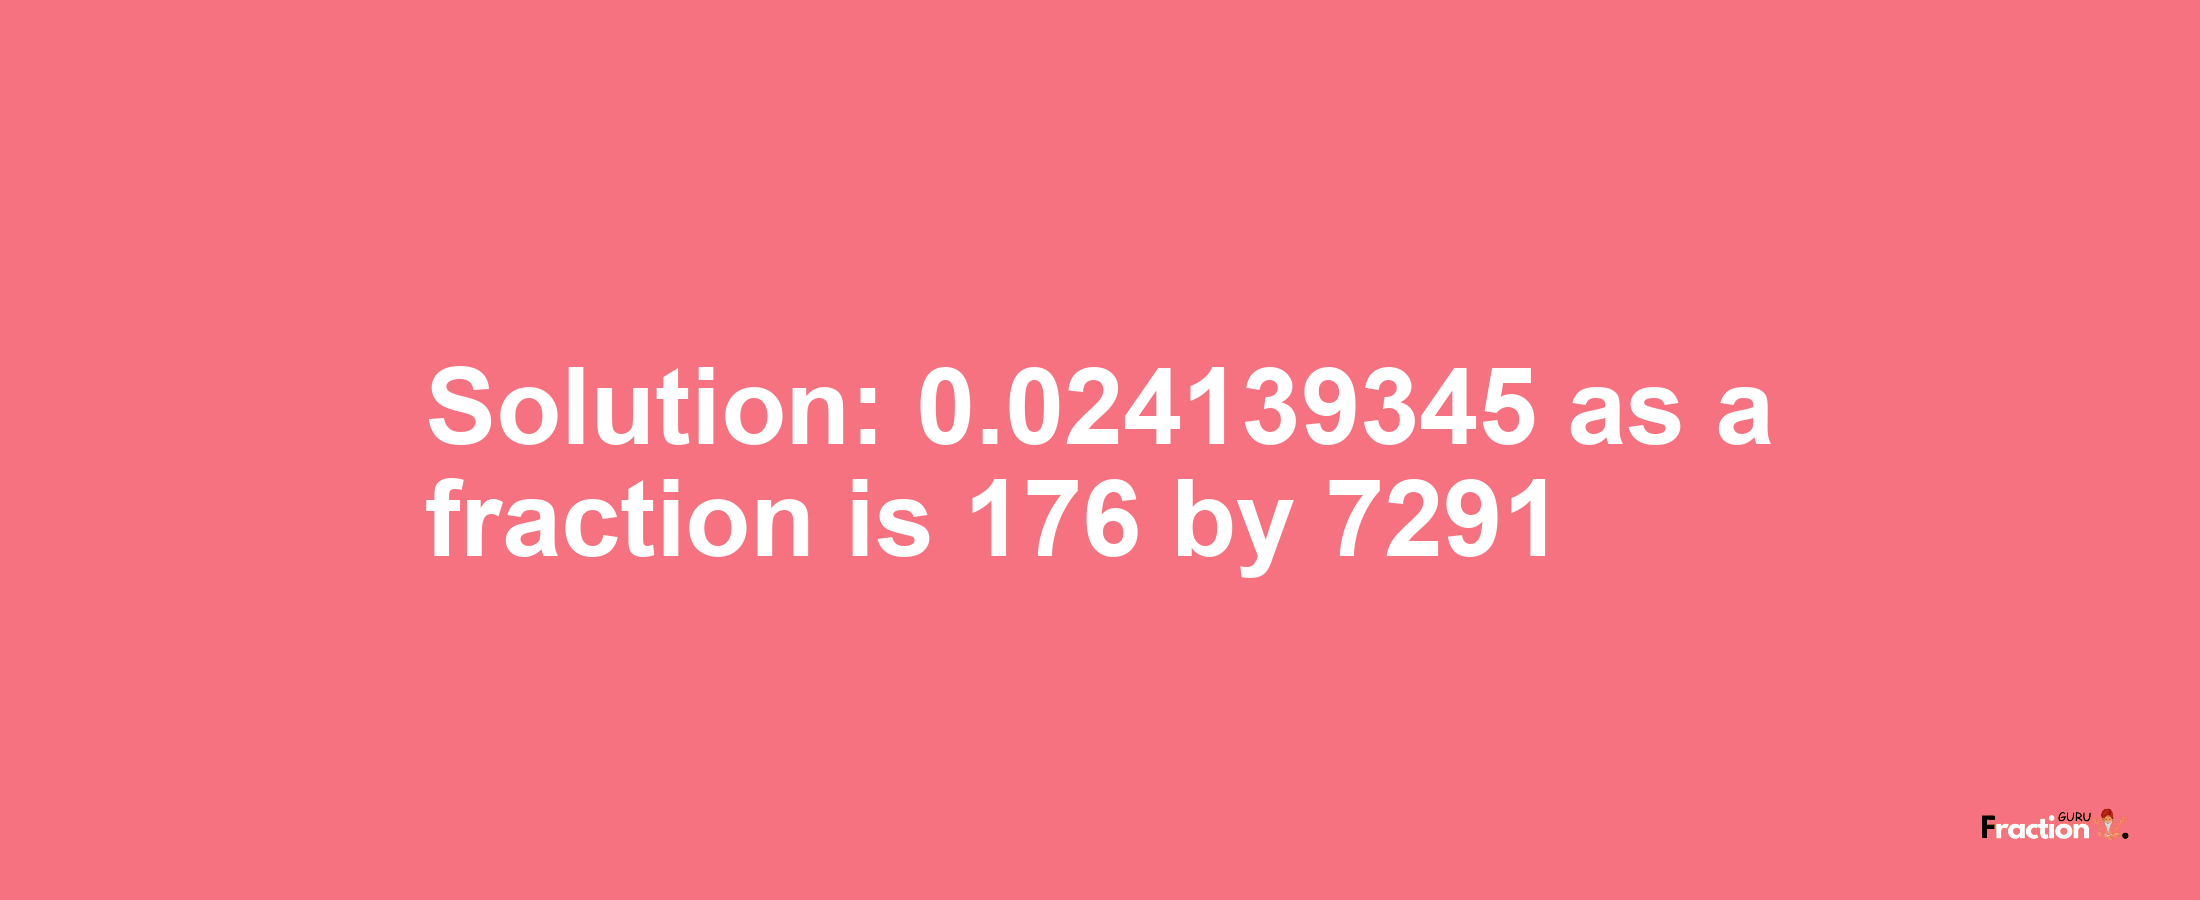 Solution:0.024139345 as a fraction is 176/7291